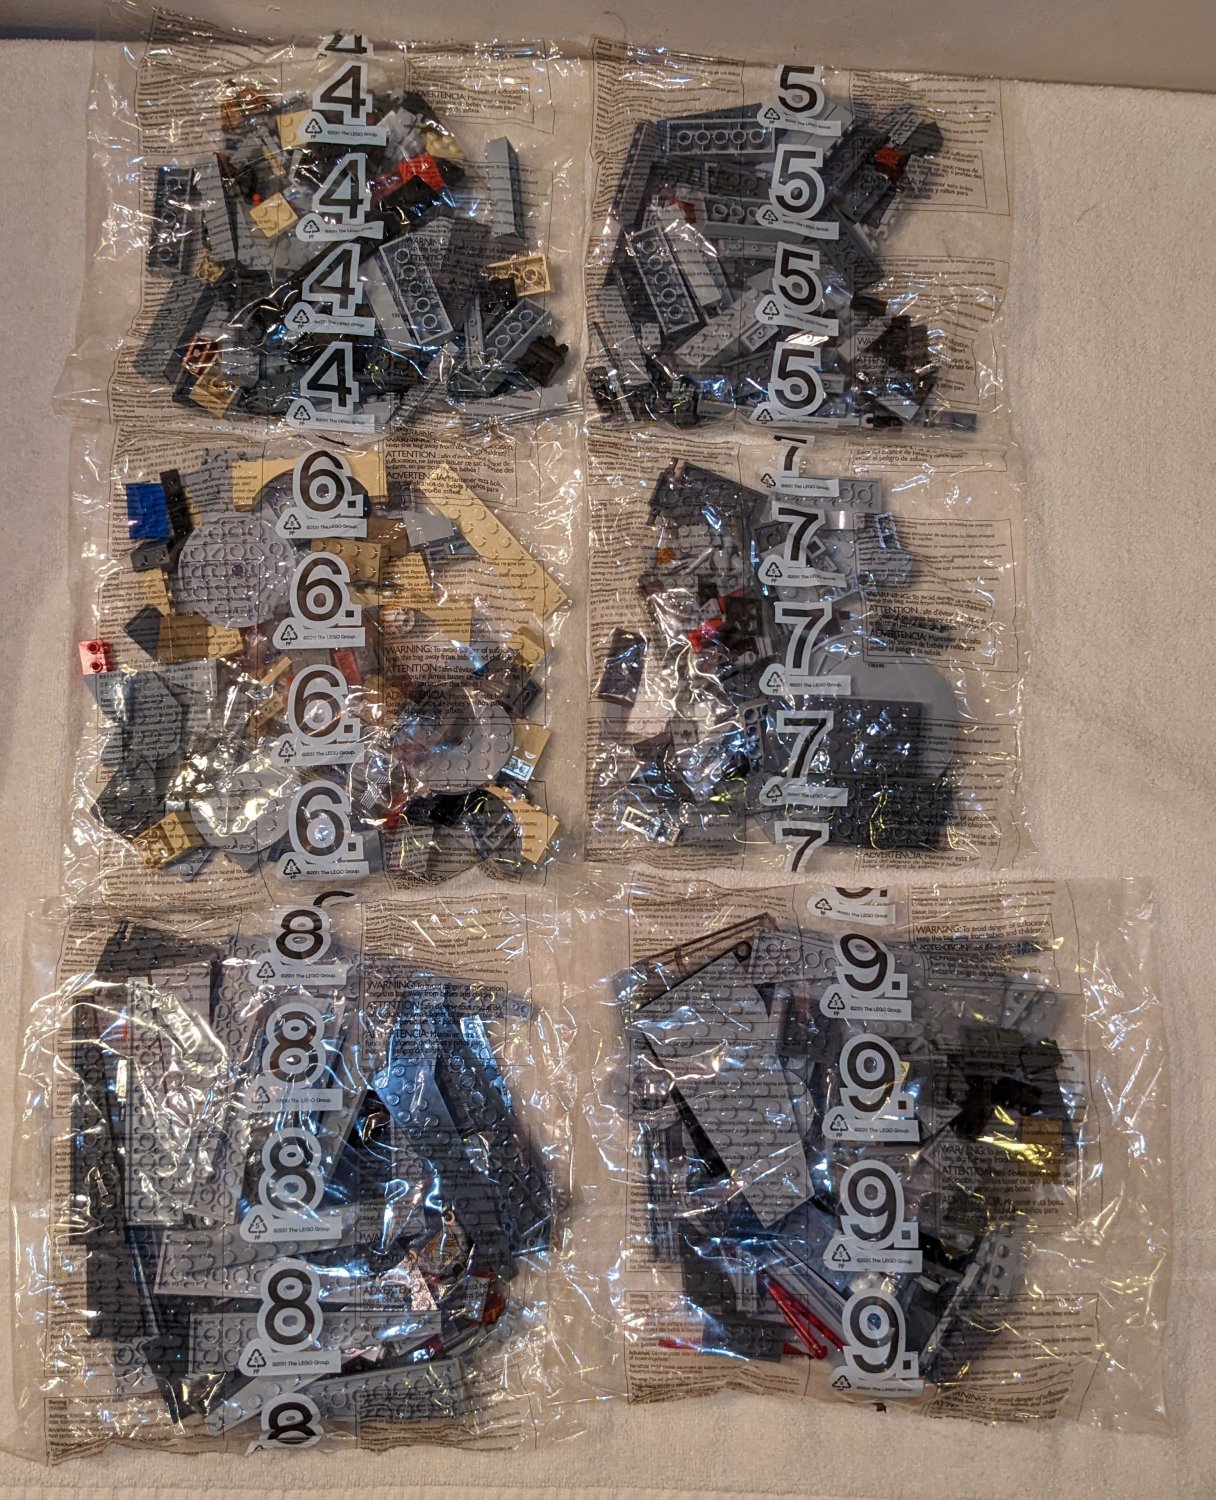 LEGO 75105 Star Wars Millennium Falcon Factory Sealed Bags 4 5 6 7 8 9 Incomplete Set 2015